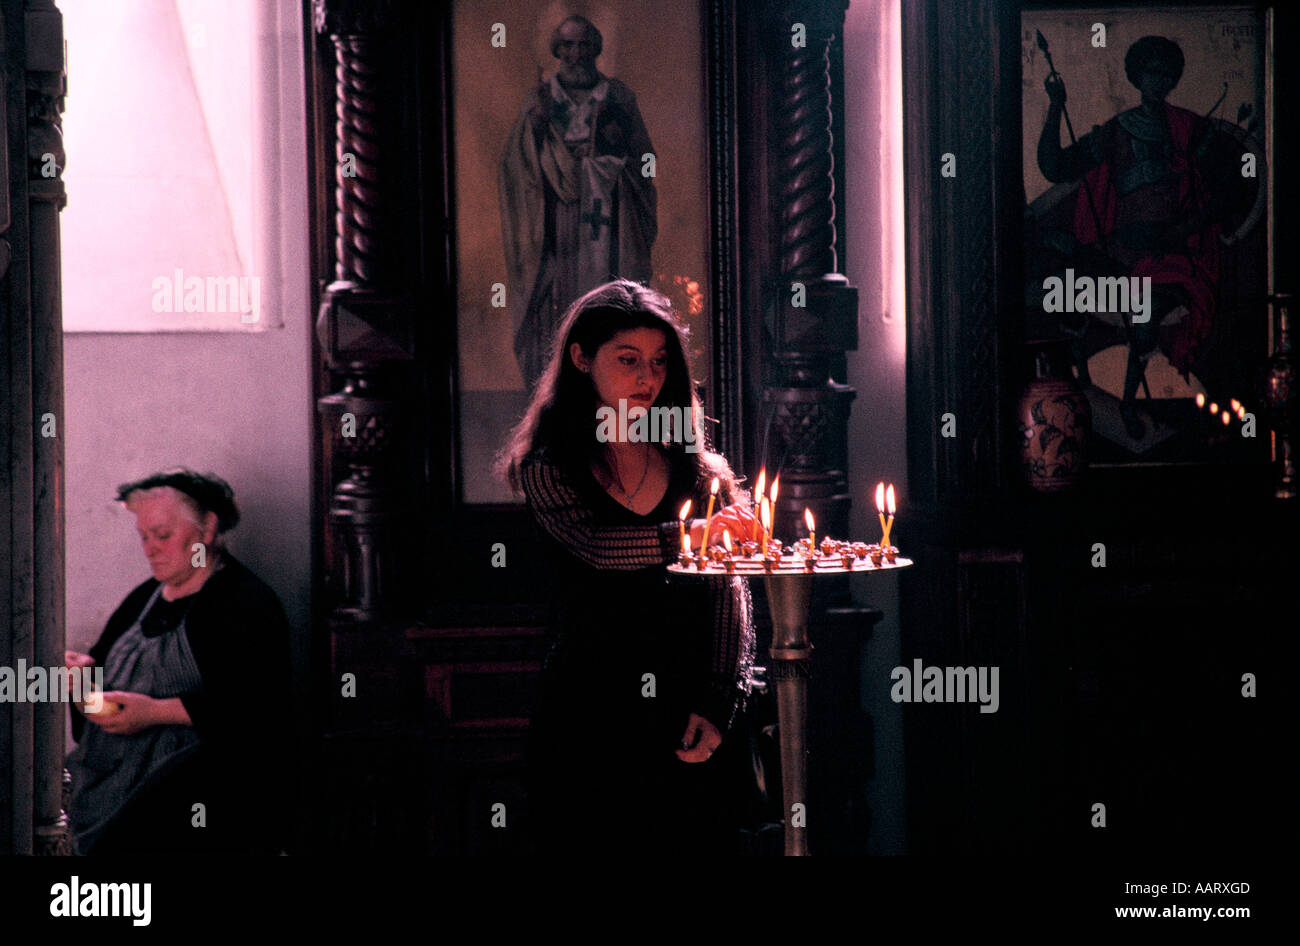 GEORGIA CANDLES ARE LIT IN ZION CATHEDRAL TBILISI 1999 Stock Photo